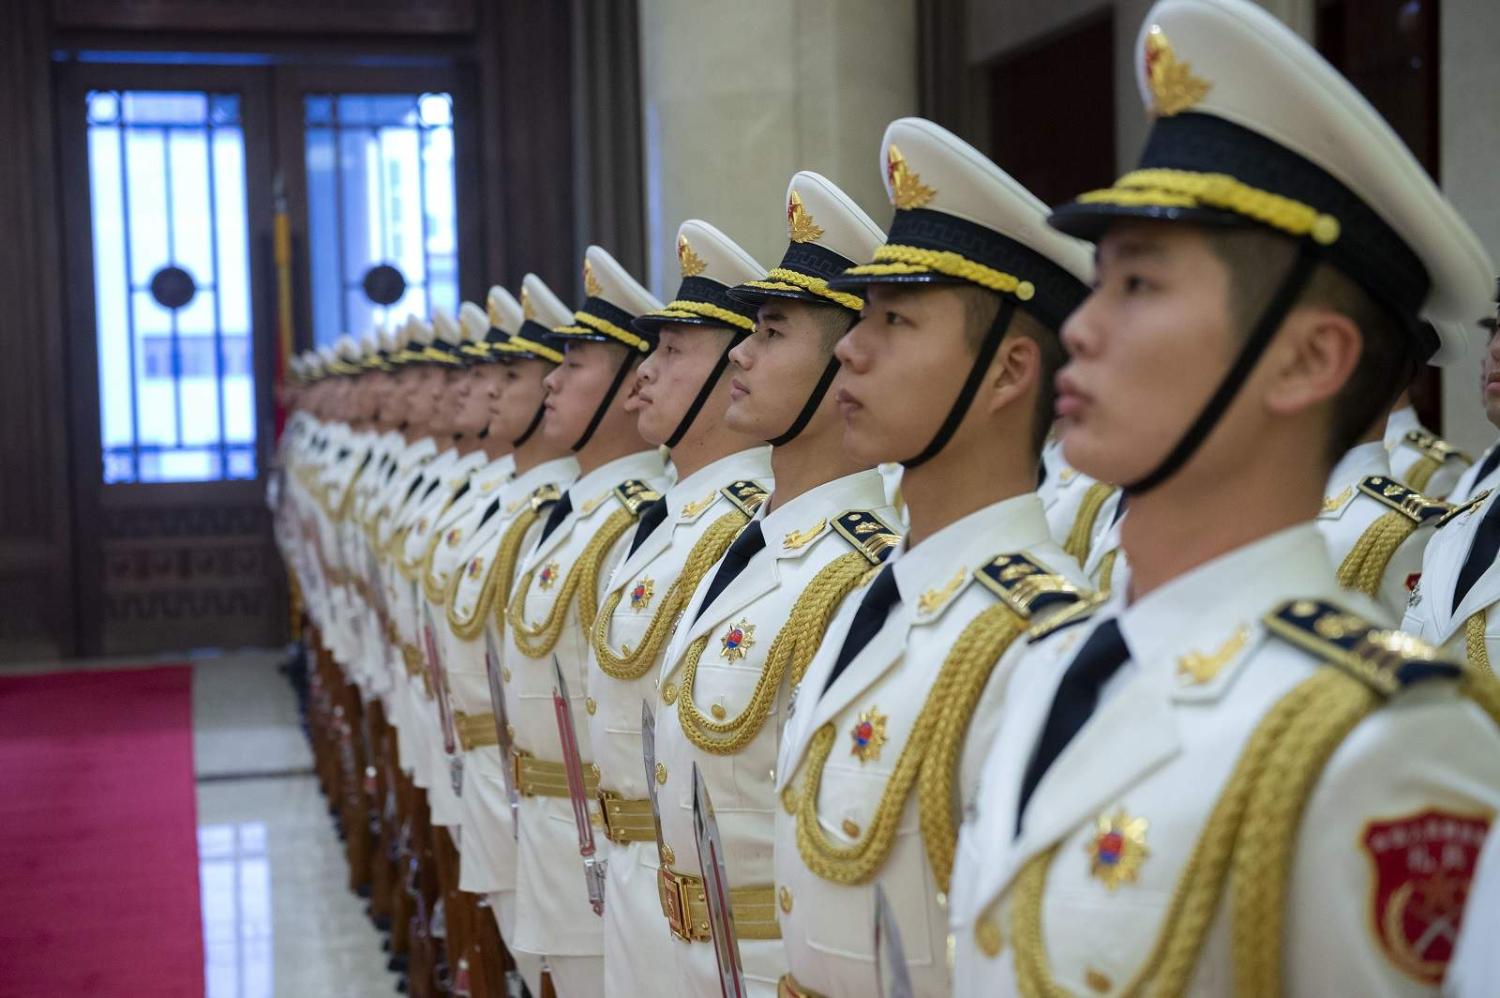 Chinese sailors before a visit by Chief of Naval Operations Adm. John Richardson to the PLA Navy headquarters, Beijing, 14 January 2019 (Elliott Fabrizio/US Navy/Flickr)